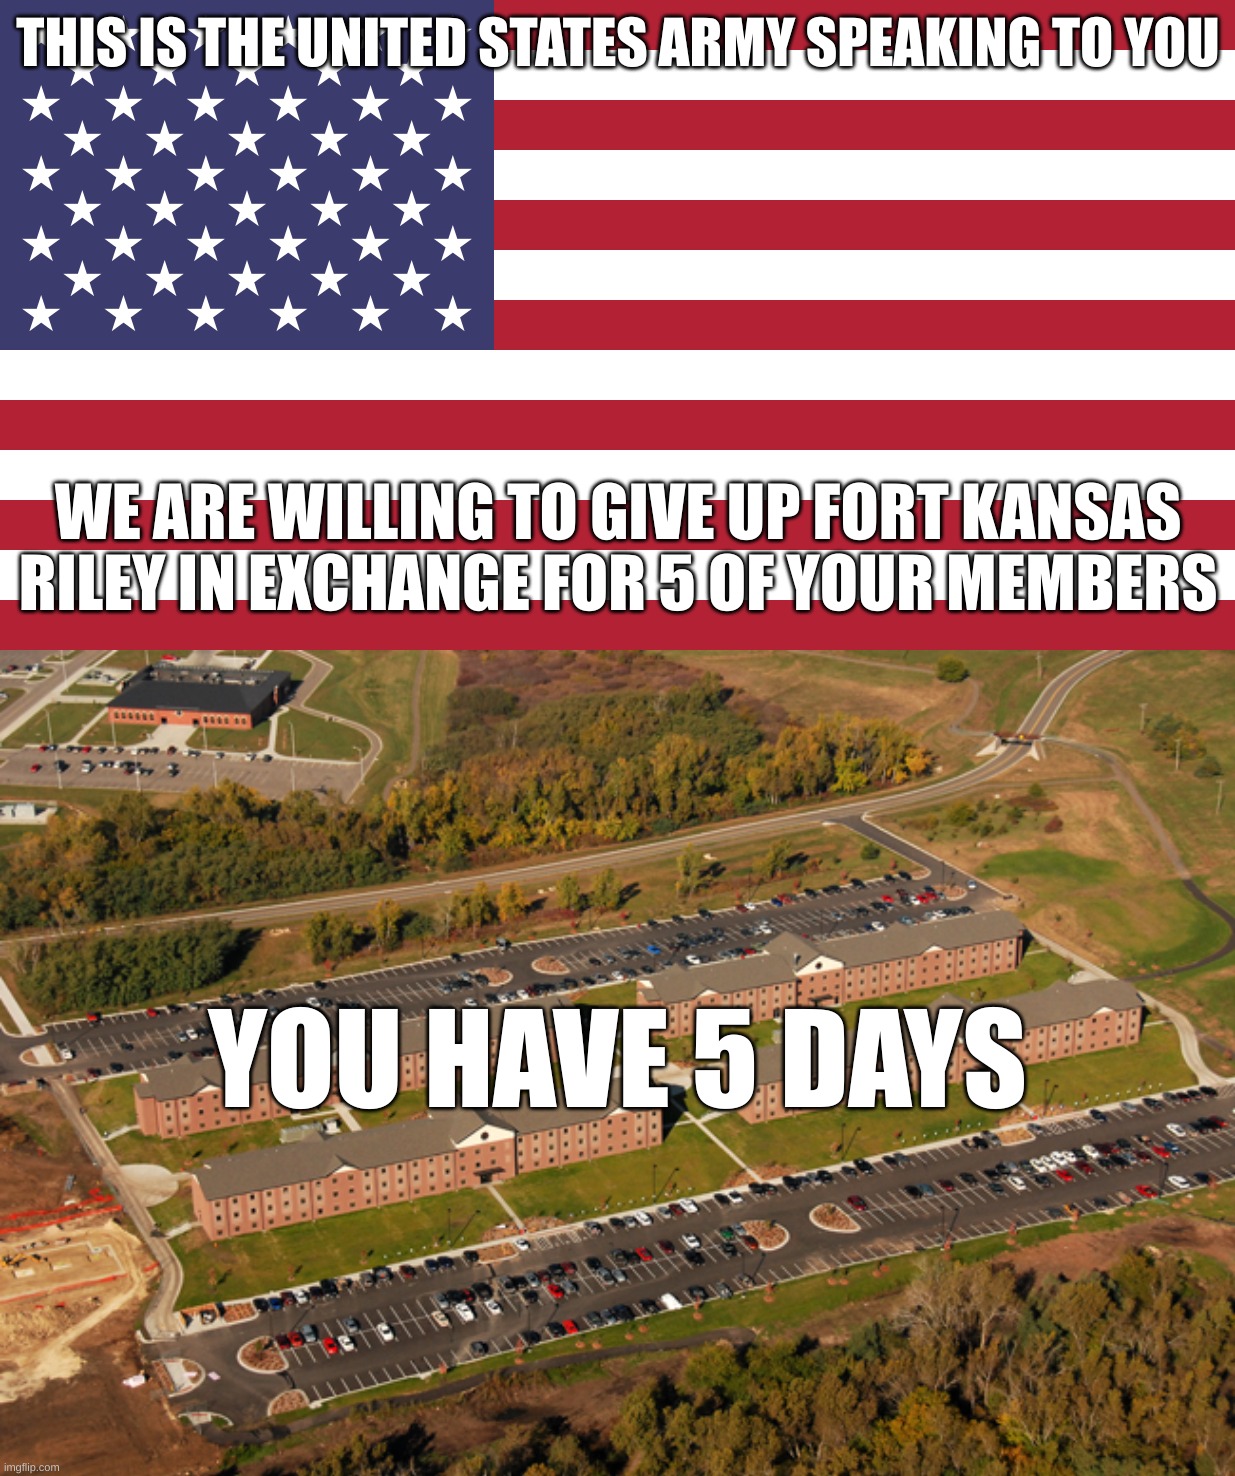 The United States Army makes an offer | THIS IS THE UNITED STATES ARMY SPEAKING TO YOU; WE ARE WILLING TO GIVE UP FORT KANSAS RILEY IN EXCHANGE FOR 5 OF YOUR MEMBERS; YOU HAVE 5 DAYS | image tagged in flag of usa | made w/ Imgflip meme maker